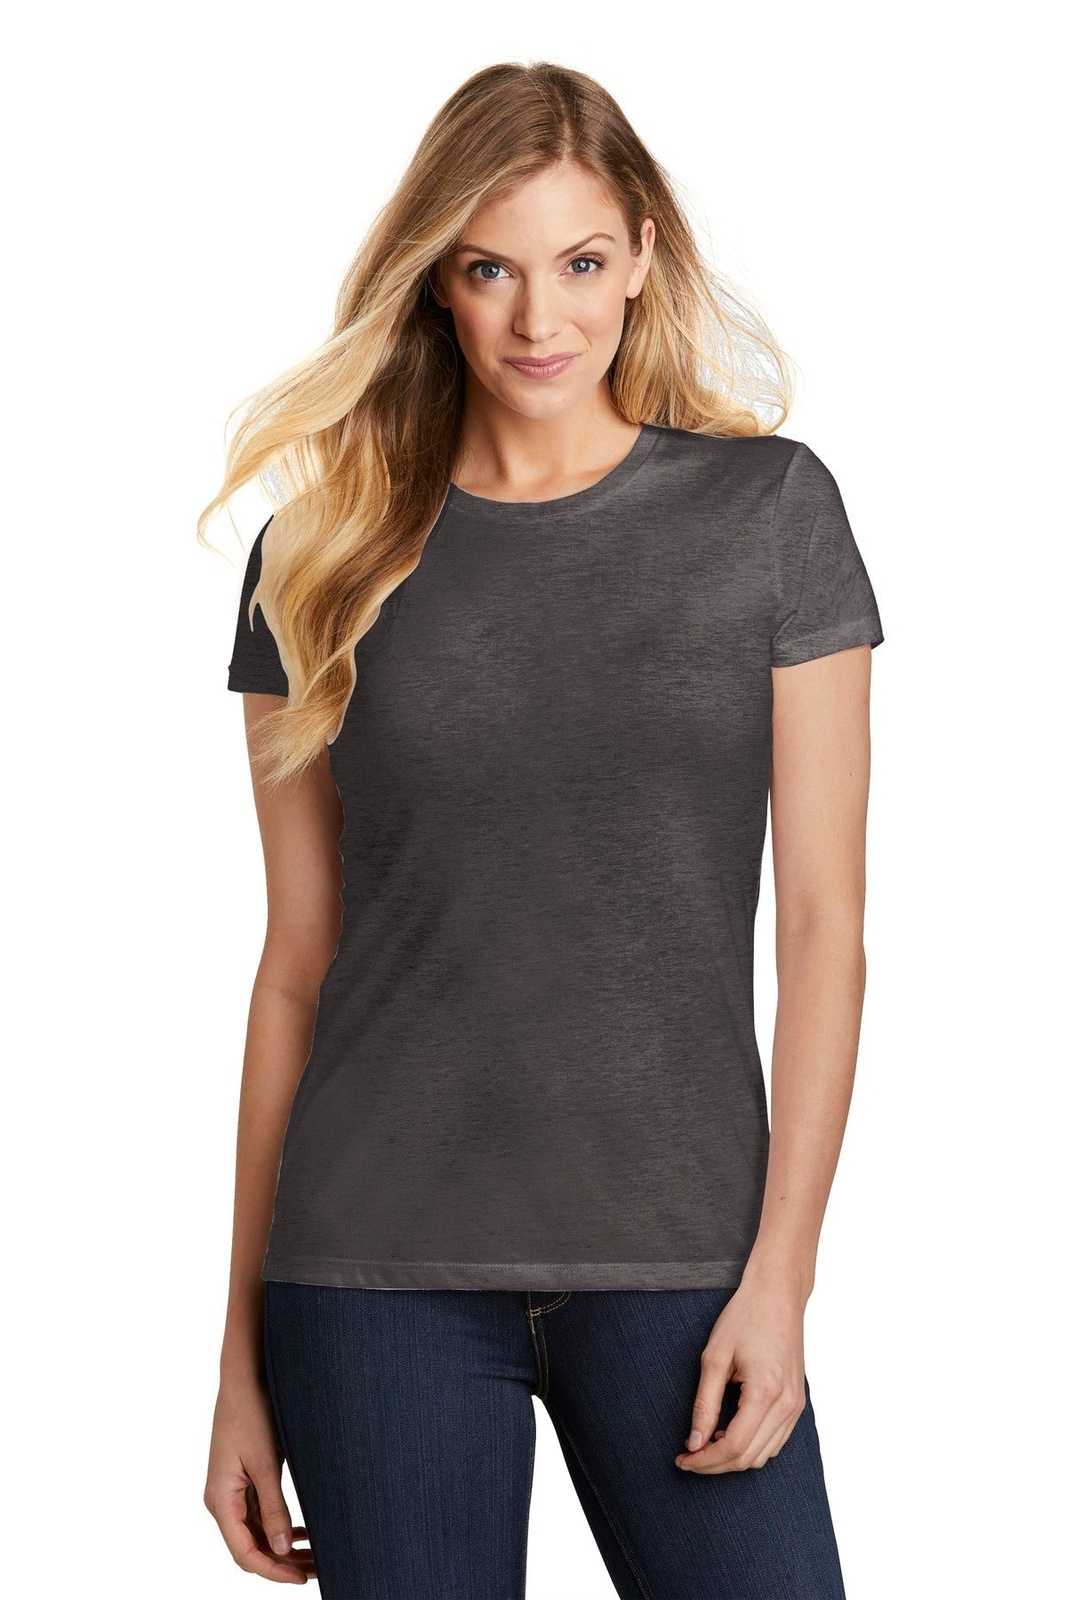 District DT155 Women's Fitted Perfect Tri Tee - Heathered Charcoal - HIT a Double - 1